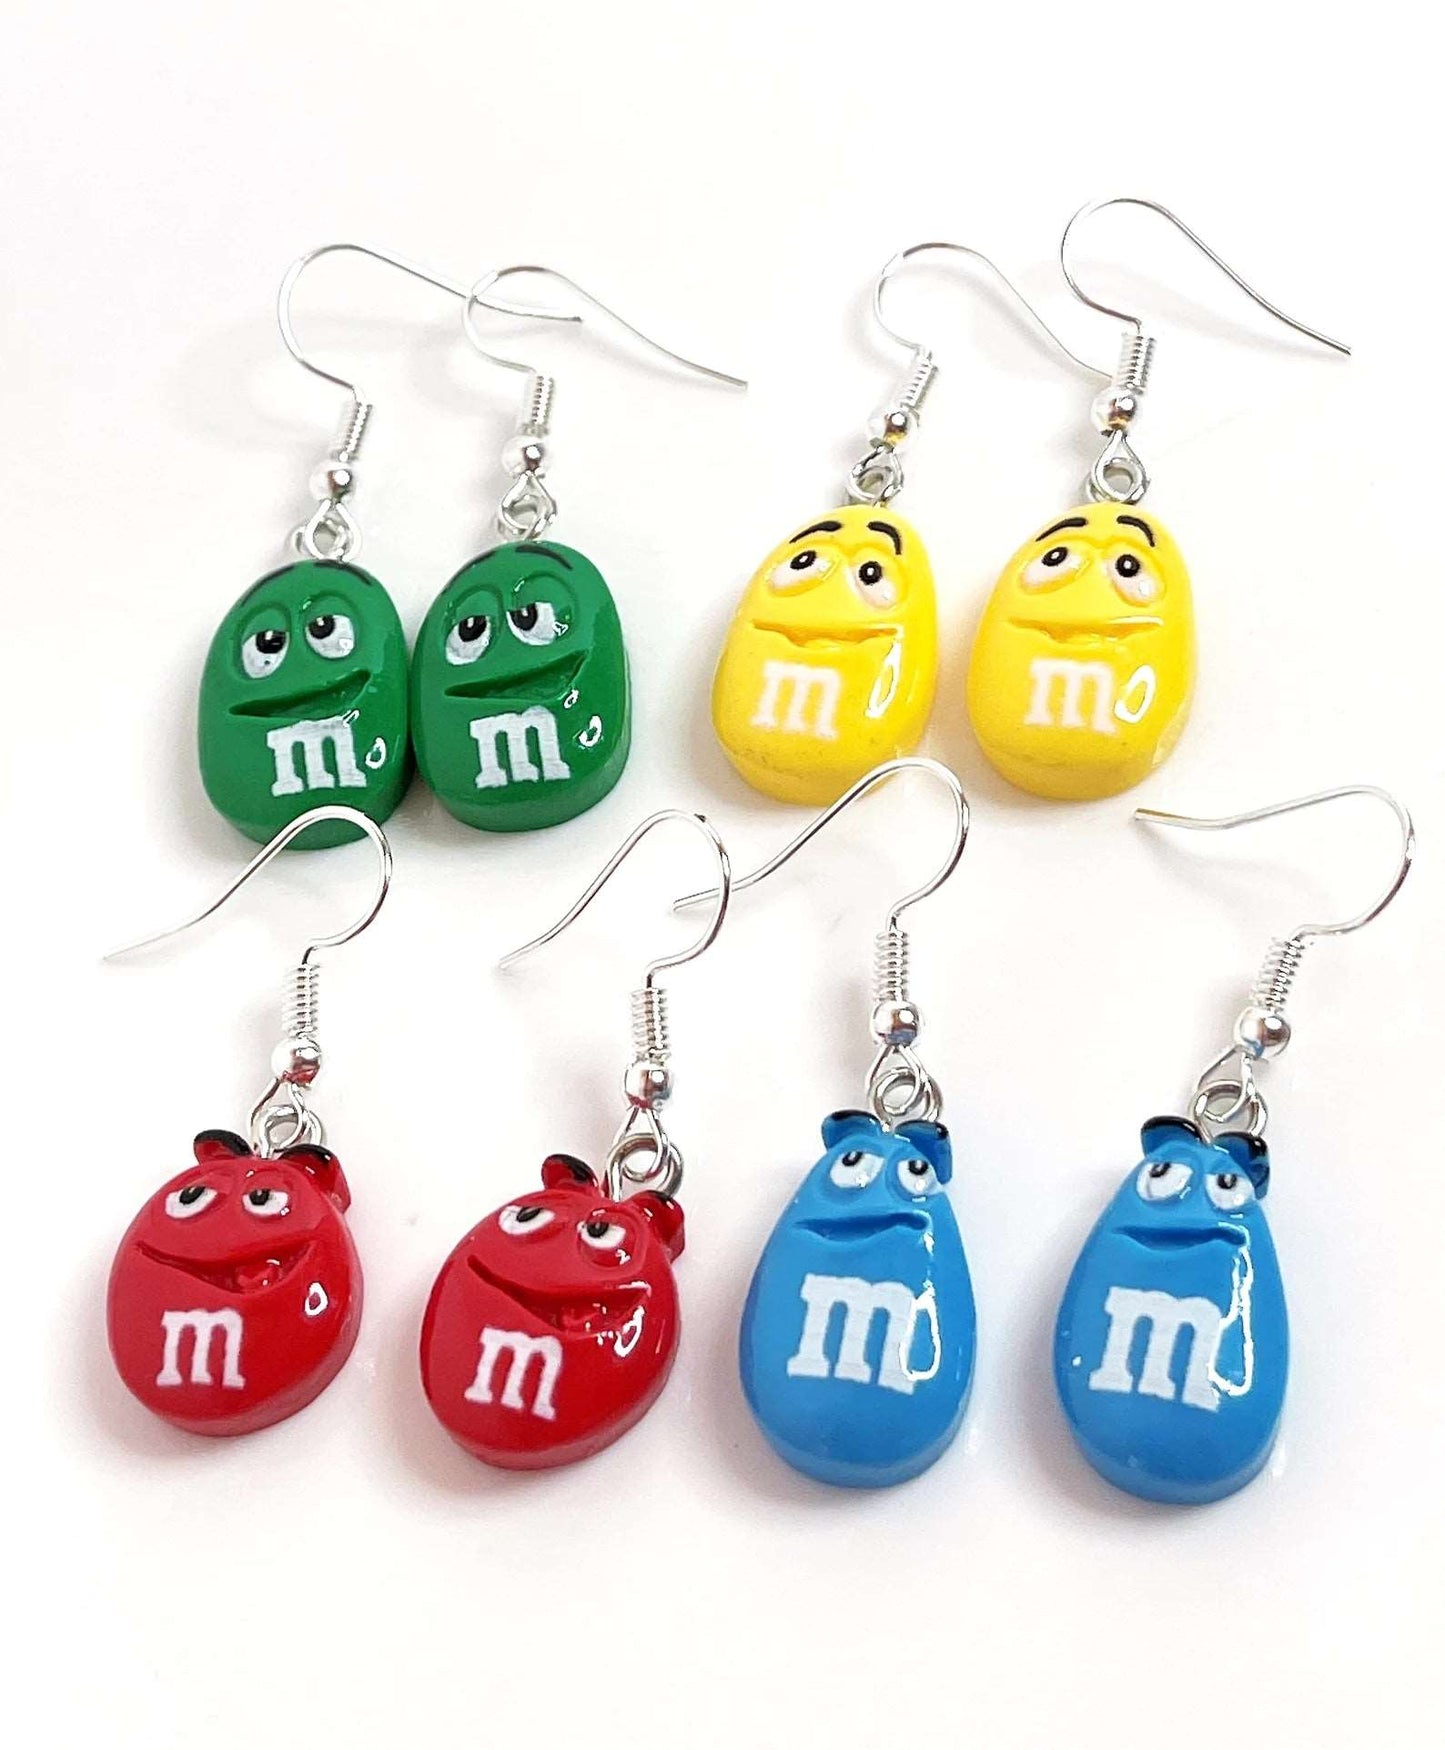 Funny Face Sweet Charm Earrings | Silver Plated | Sterling Silver | Fun Candy Earrings